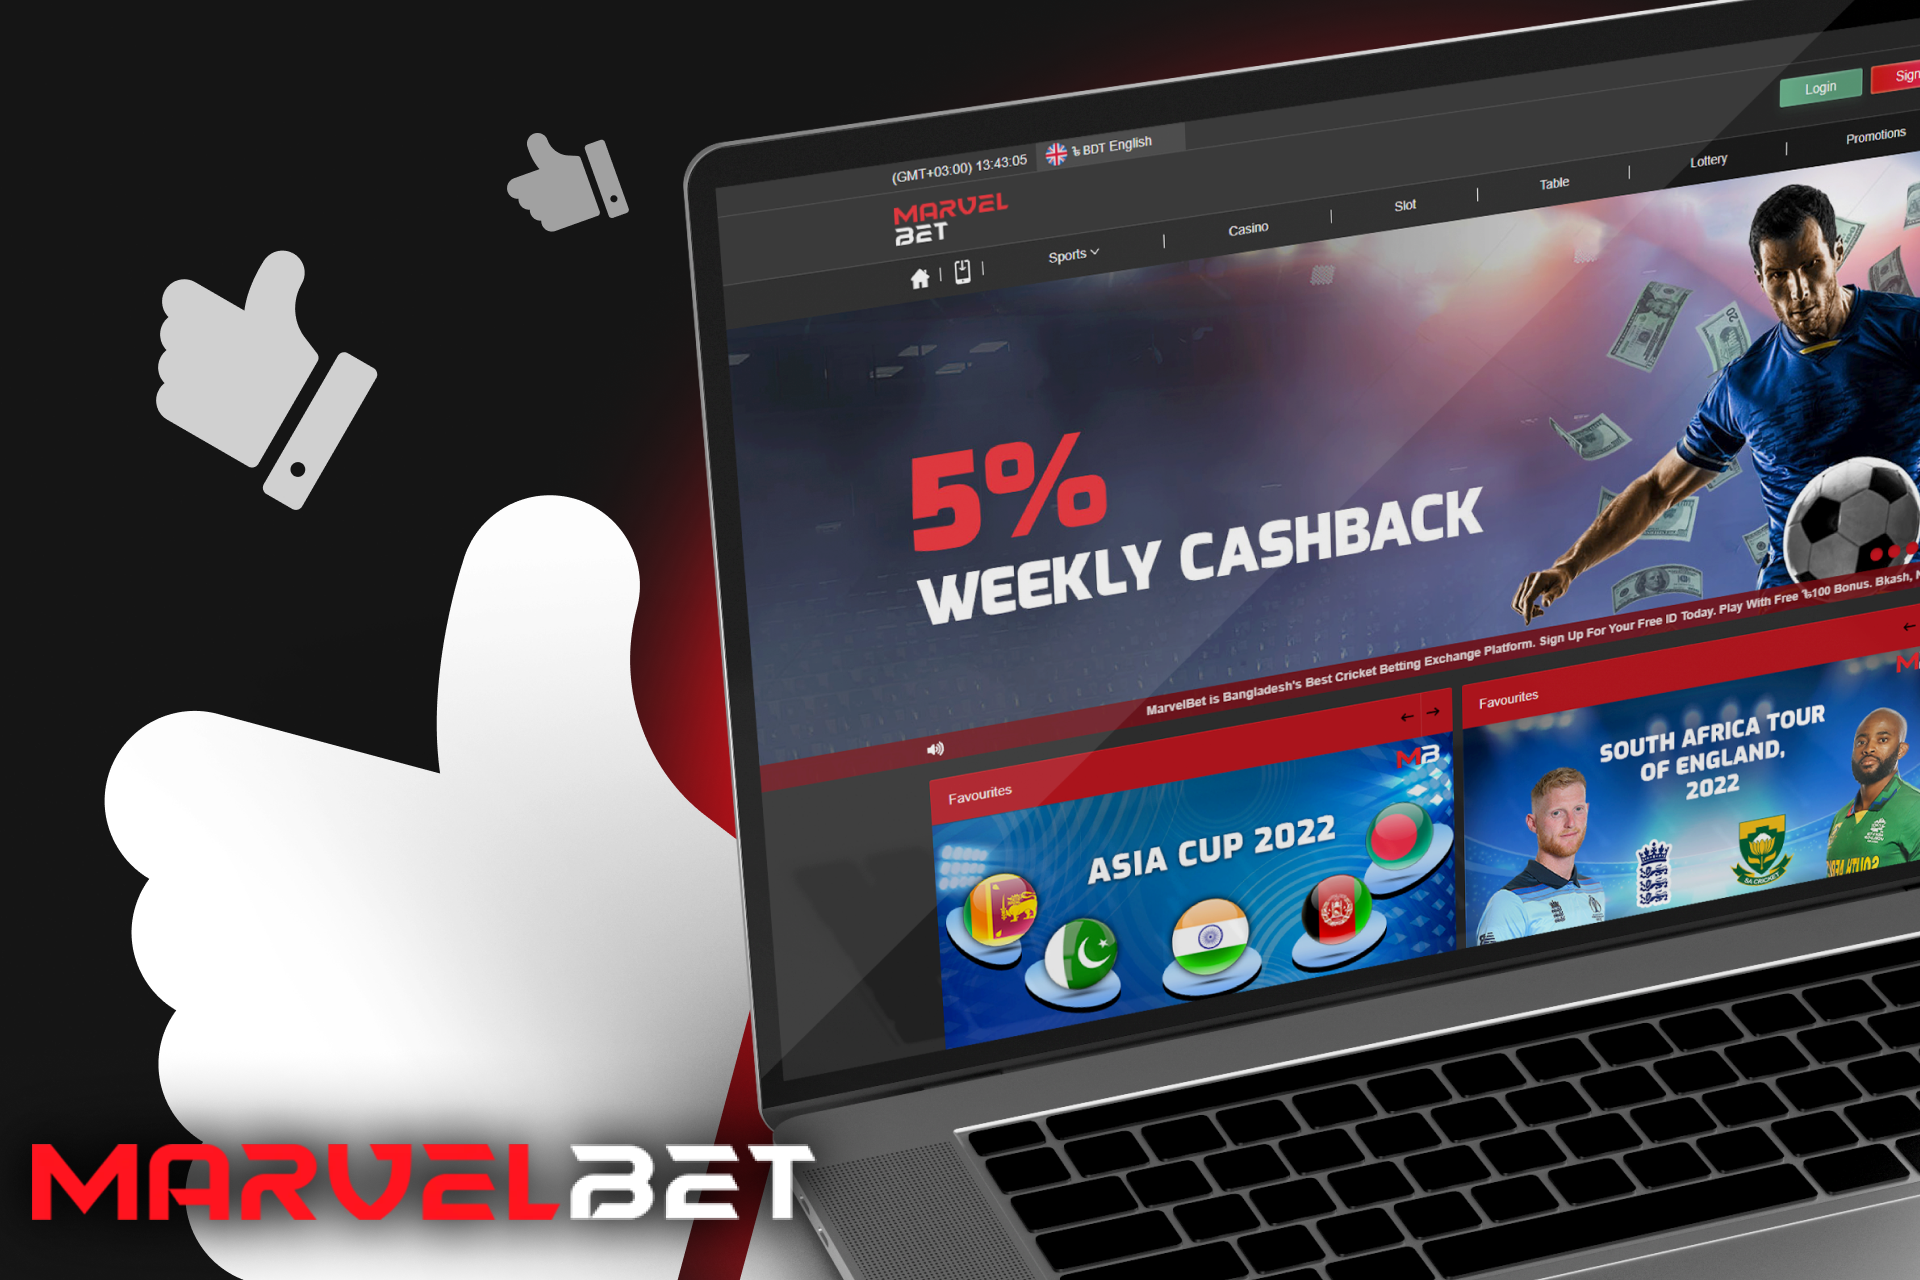 Best Make Baji999: Your Premier Betting Platform You Will Read This Year